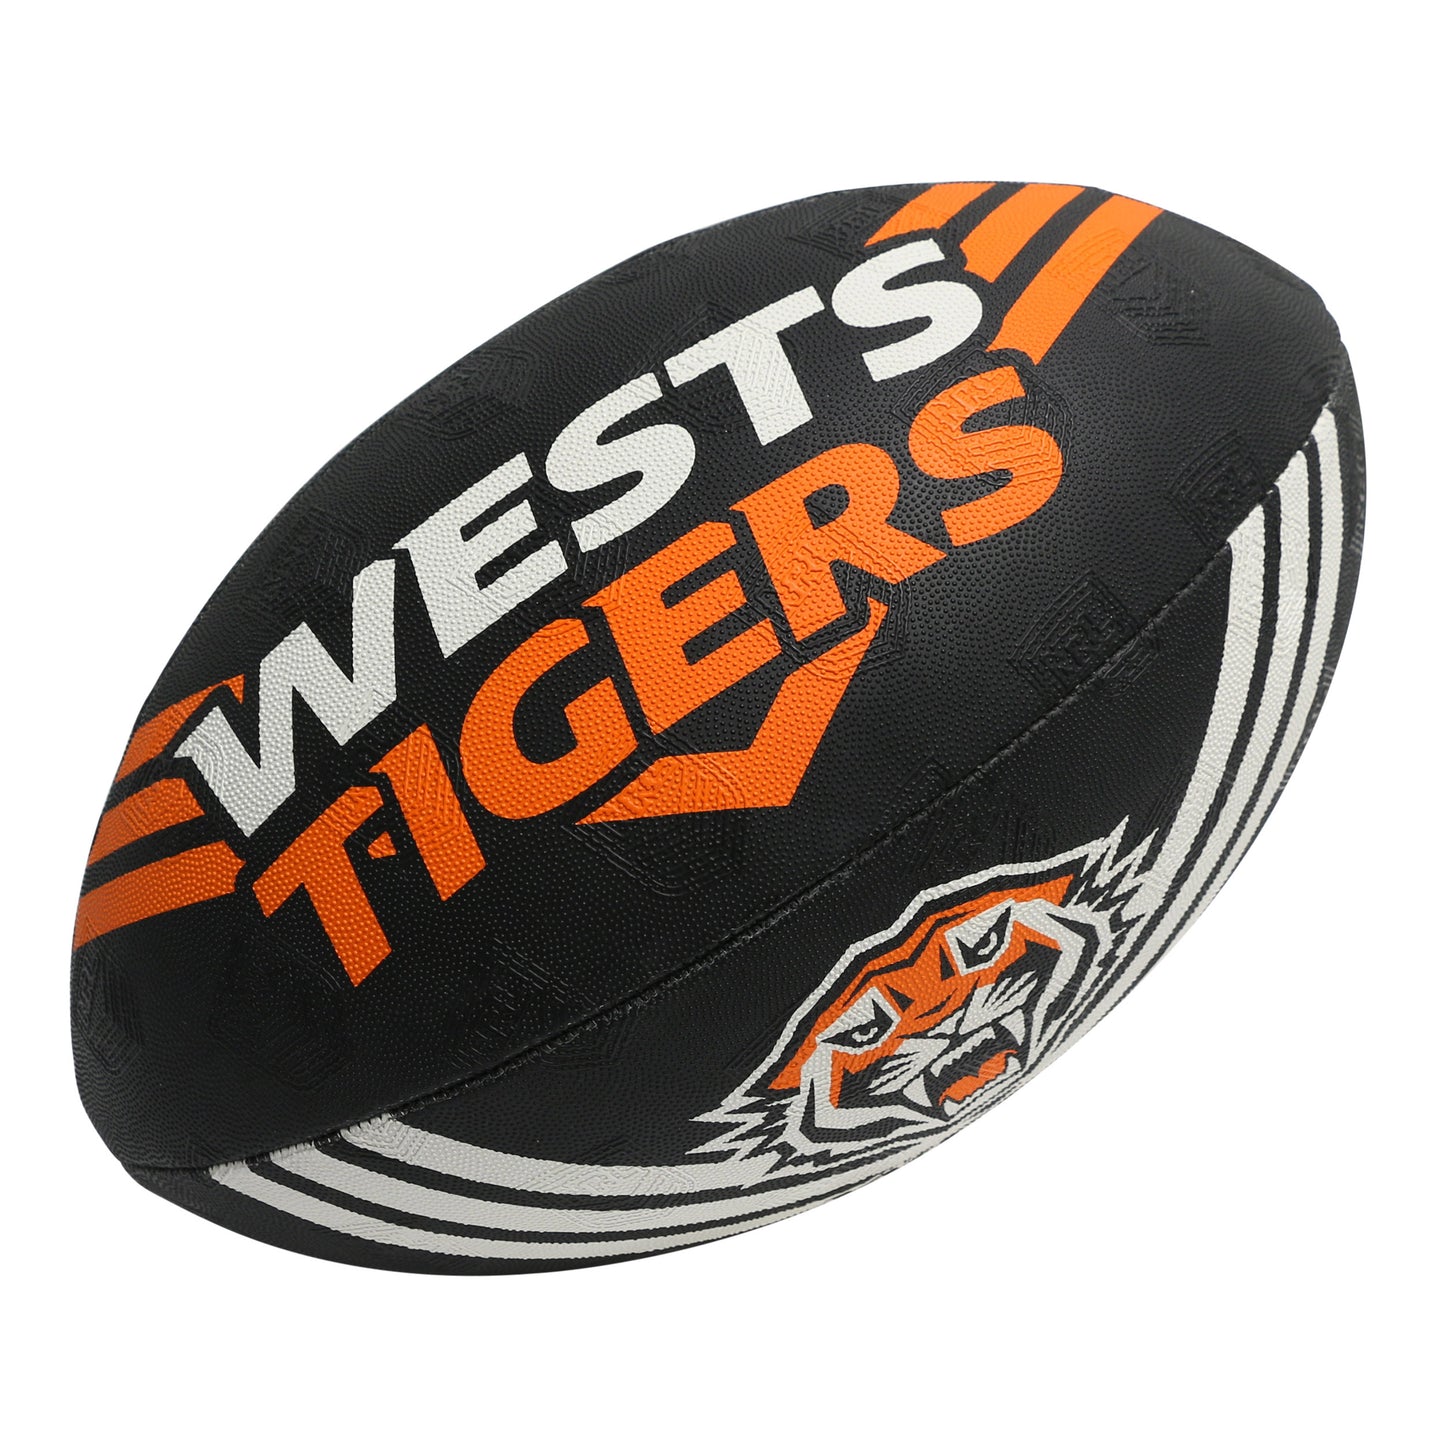 2023 NRL Tigers Supporter Ball (11 inch)